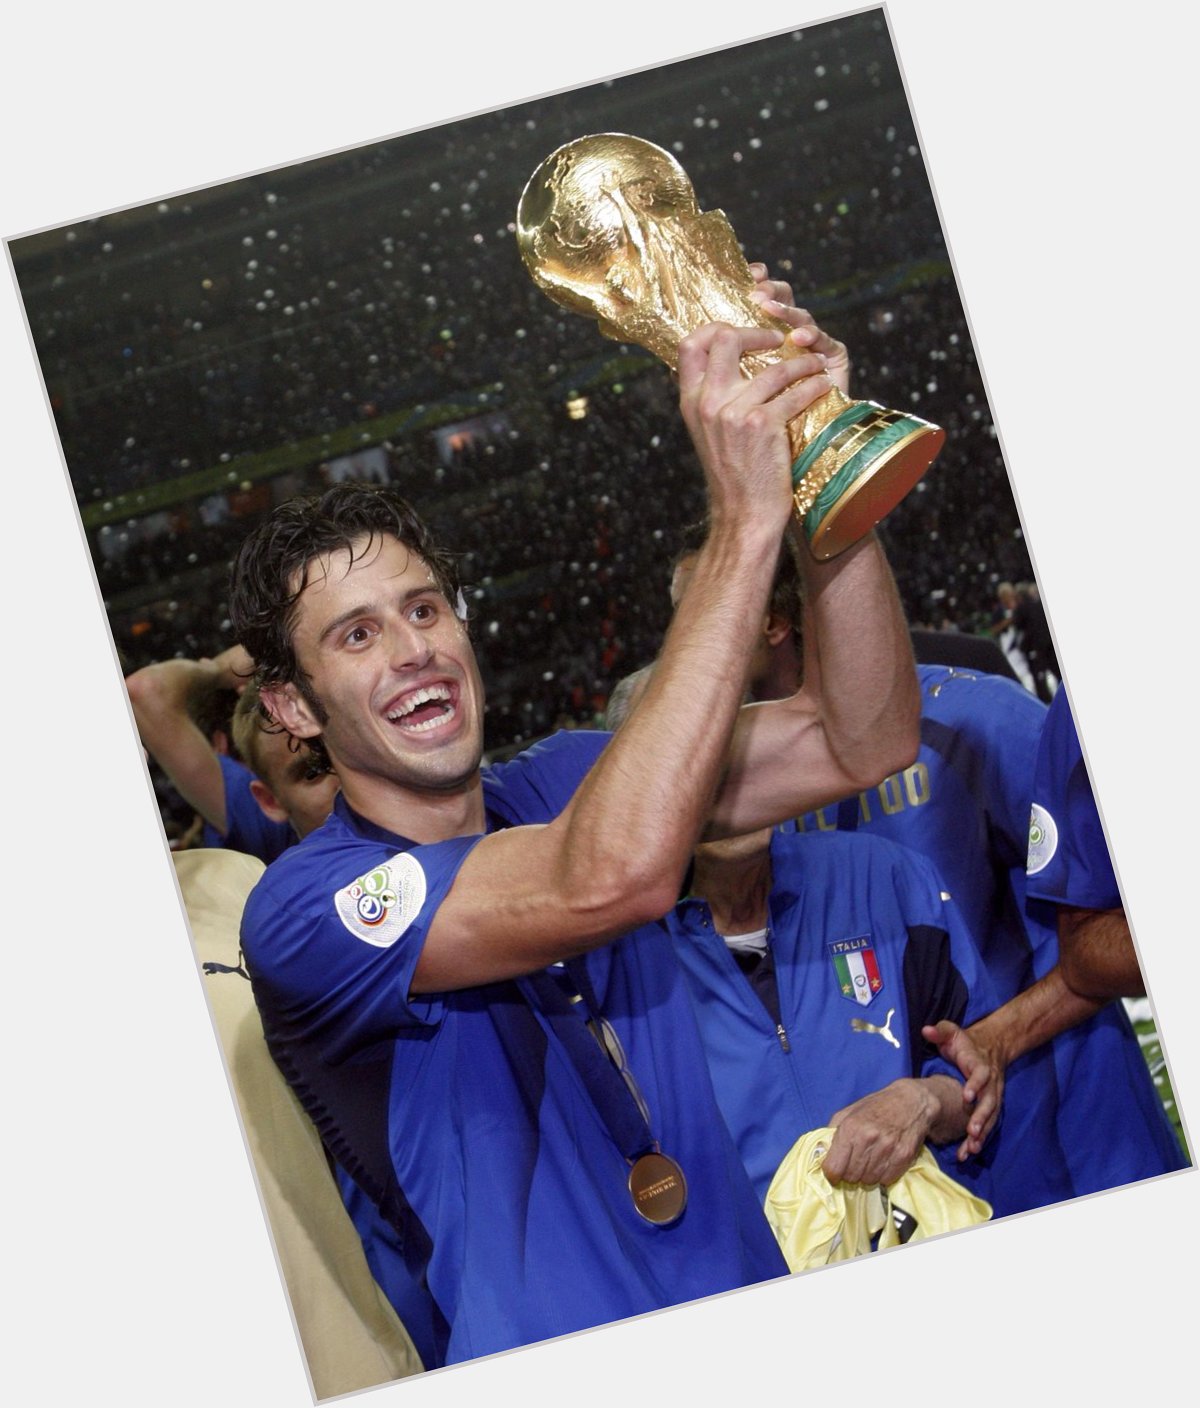 Happy birthday Fabio Grosso!
The 2006 World Cup winner is 37 today.
What was Grossos finest moment? 